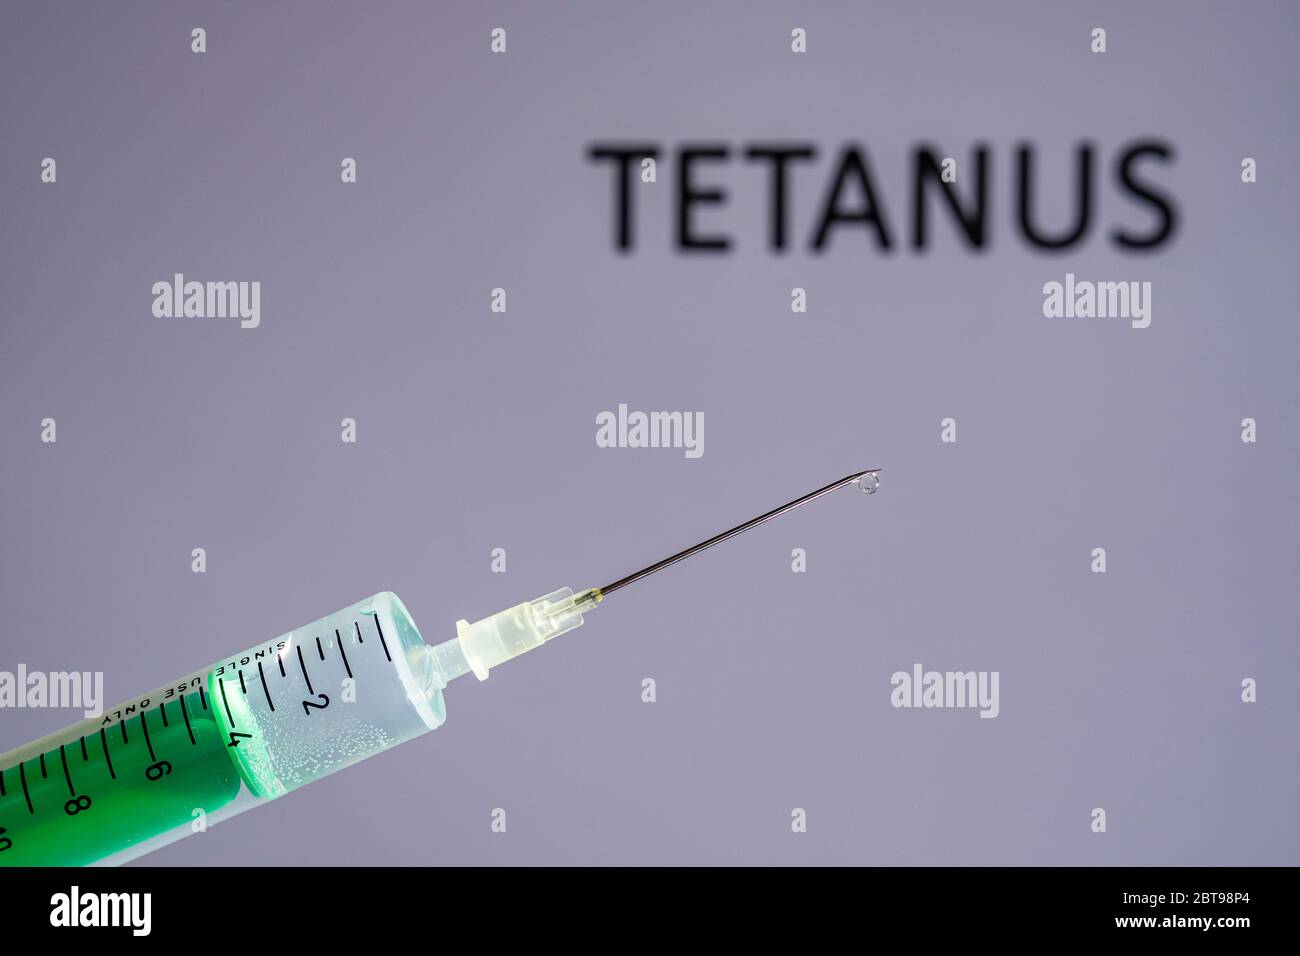 This photo illustration shows a disposable syringe with hypodermic needle, TETANUS written on a grey board behind Stock Photo